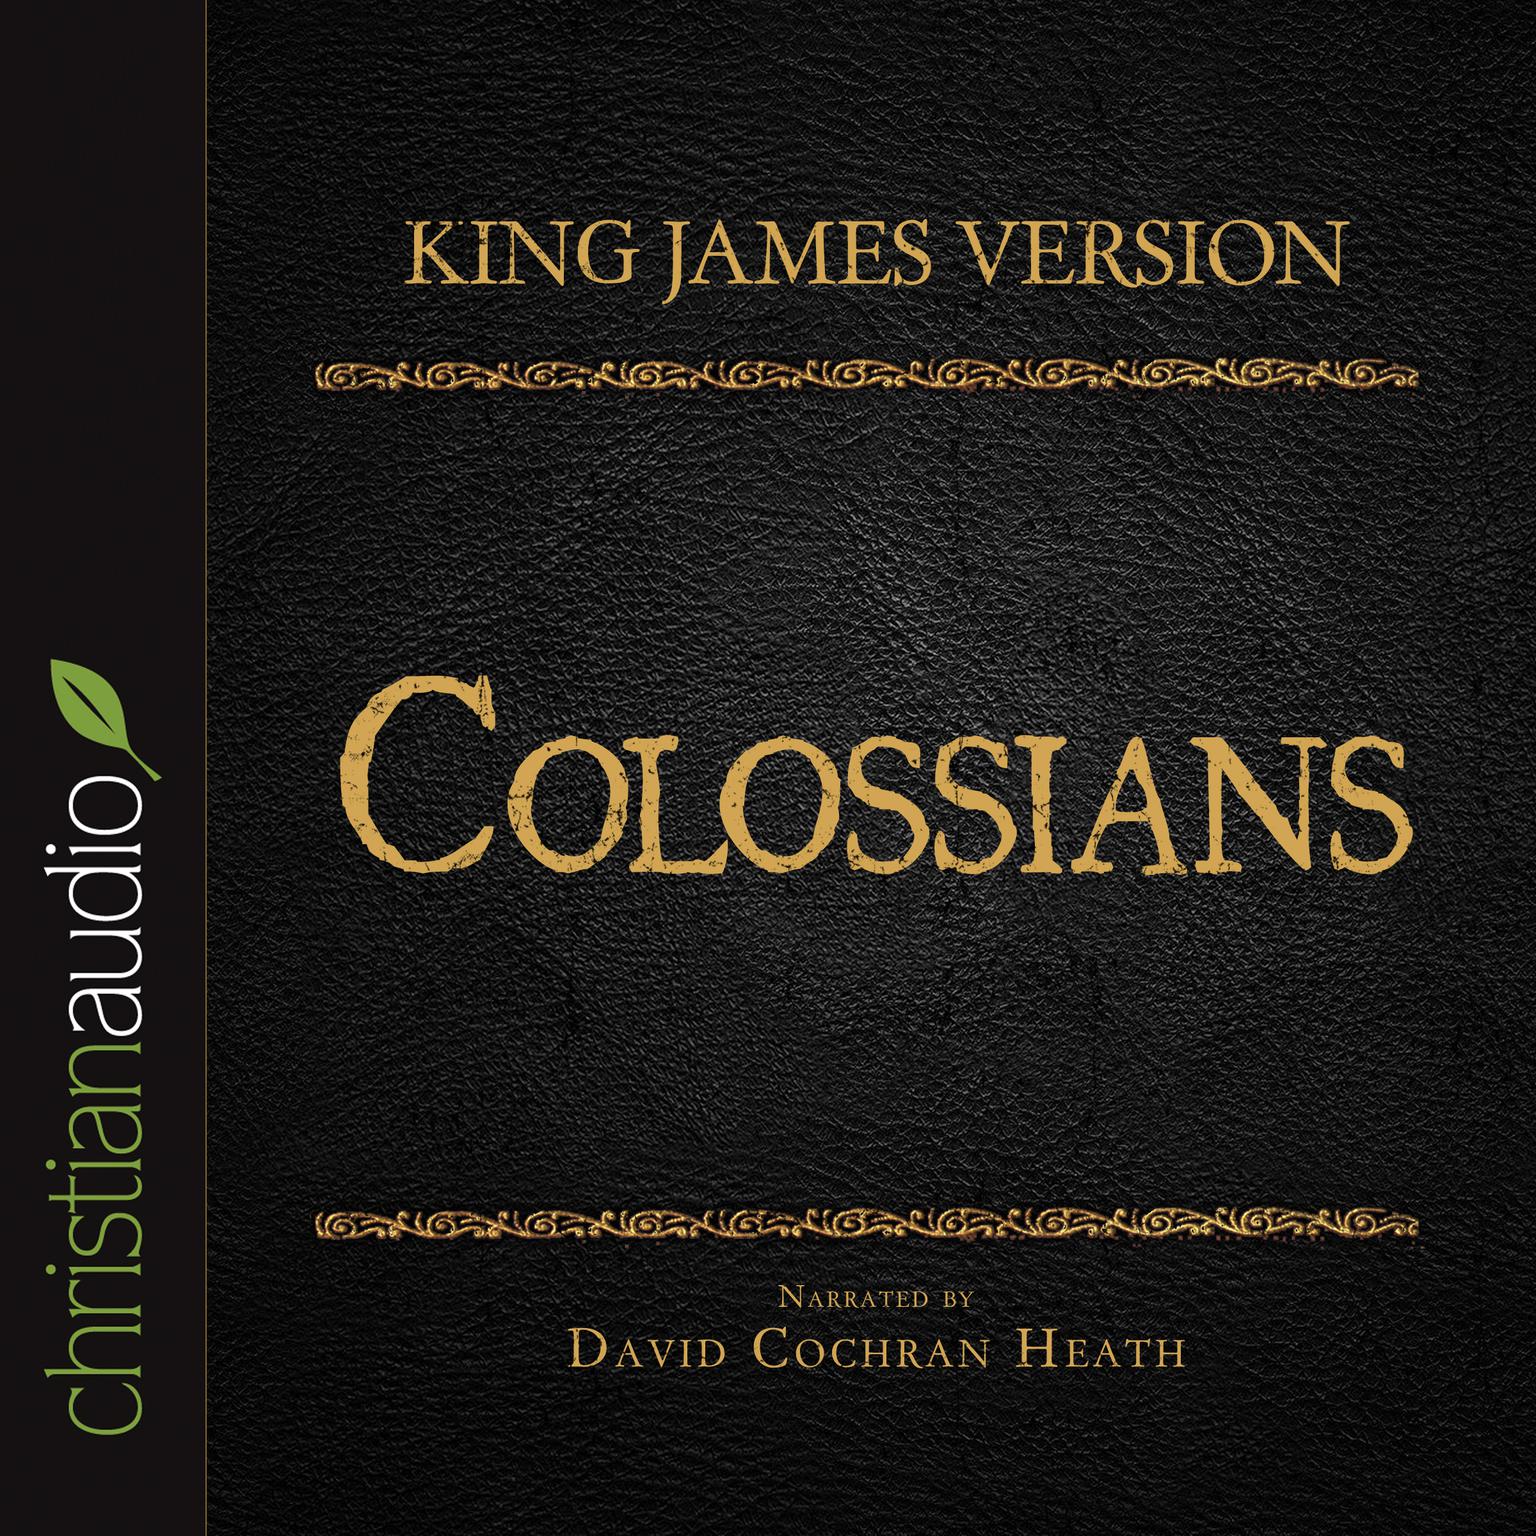 Holy Bible in Audio - King James Version: Colossians Audiobook, by David Cochran Heath